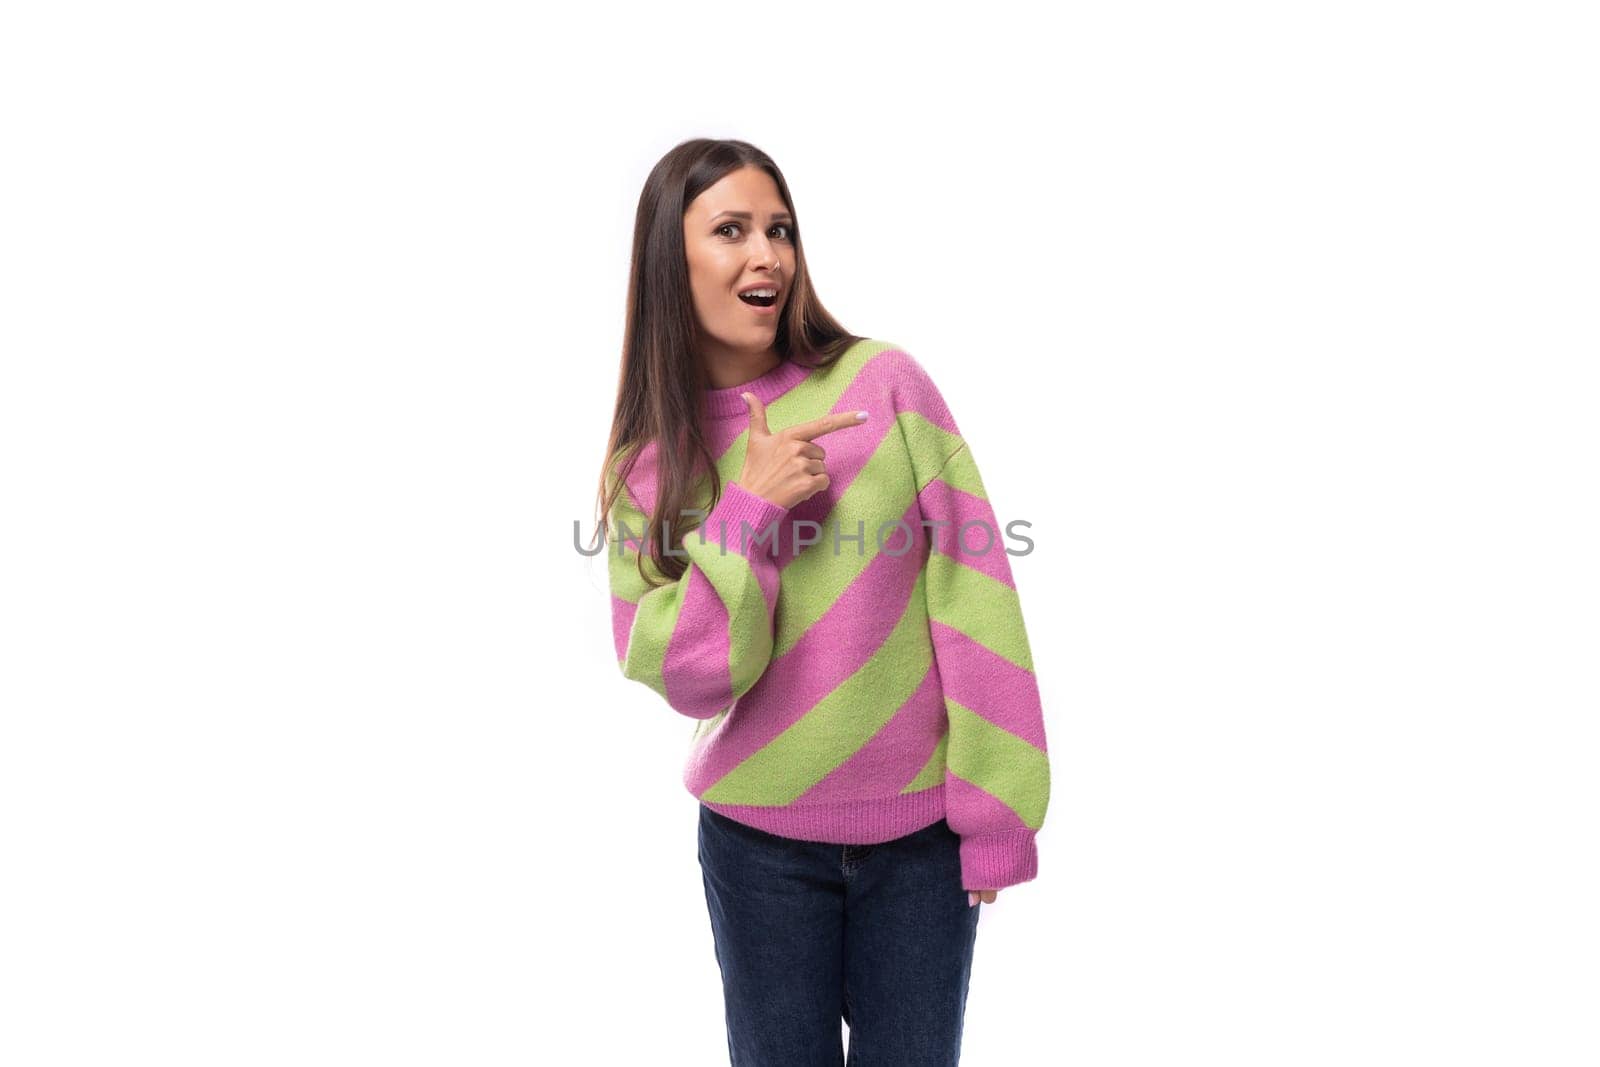 stylish cheerful young brunette woman in a striped pink sweater points her finger to the side on a white background with copy space.